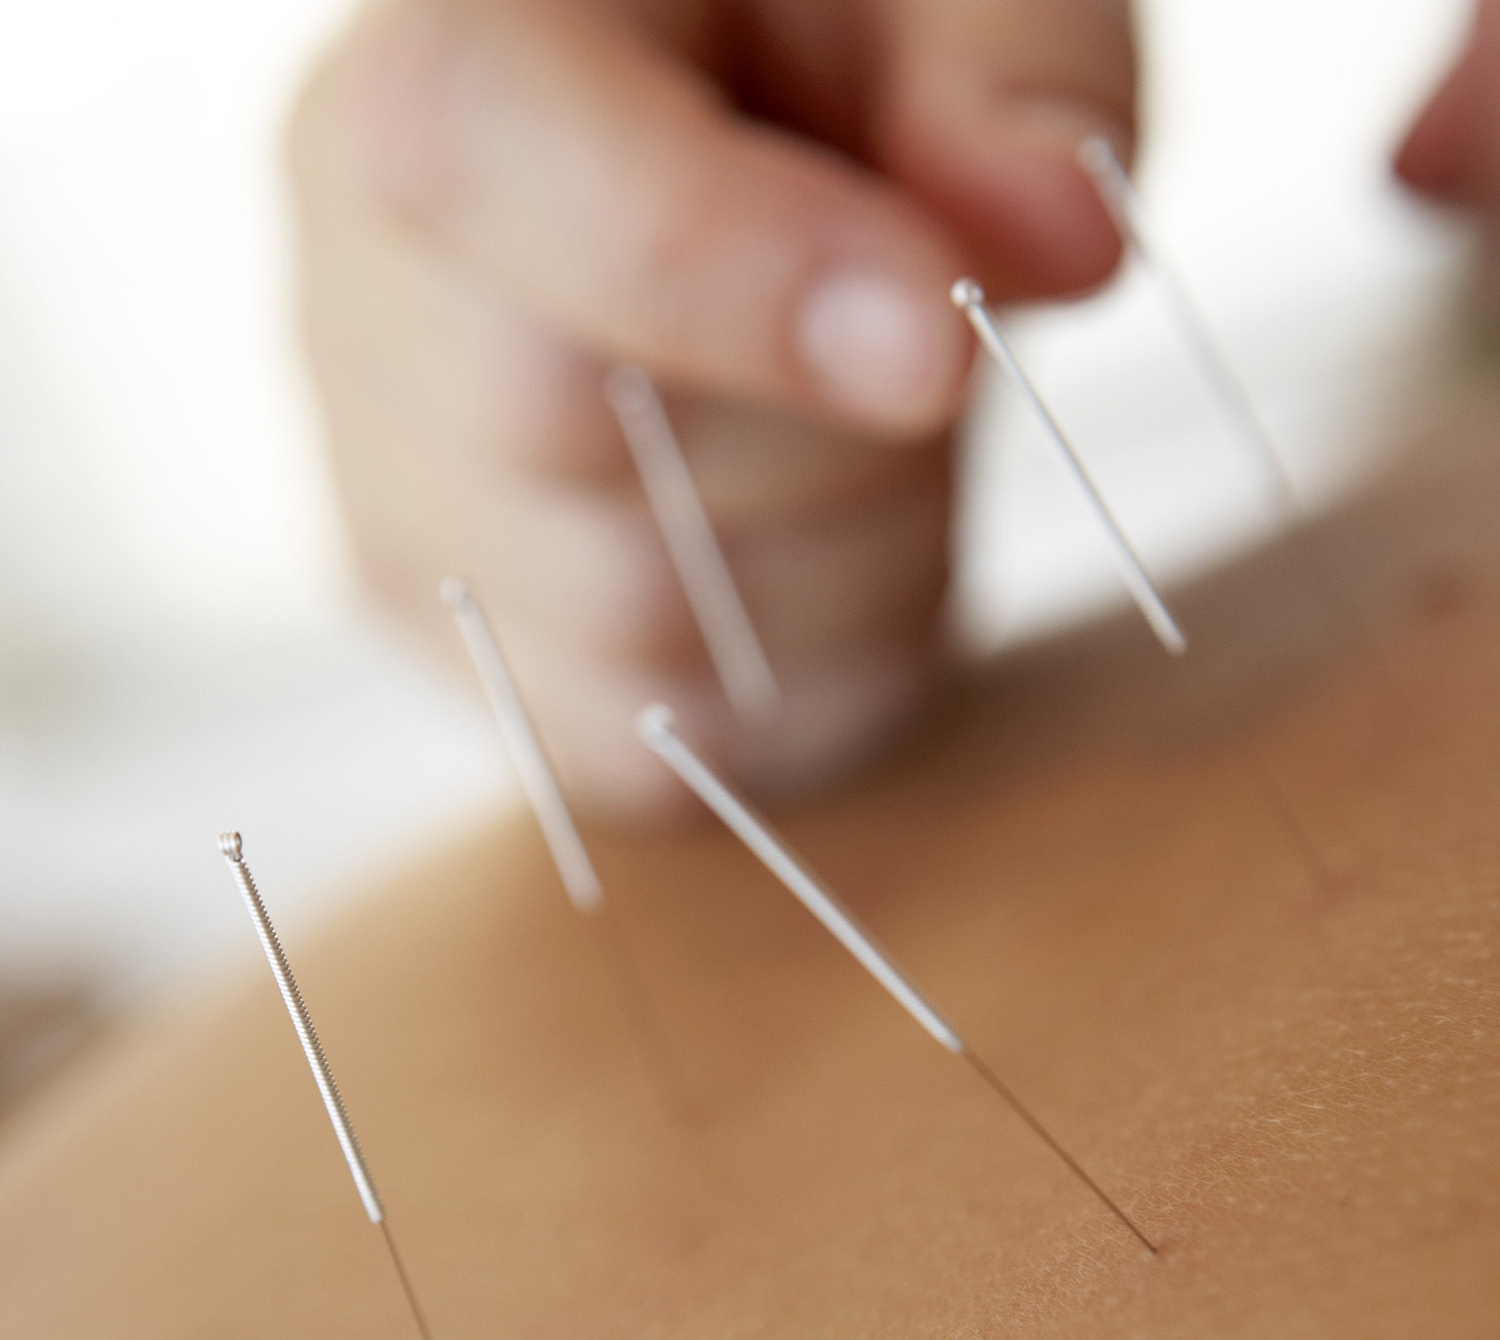 Acupuncture Relief Chronic Pains